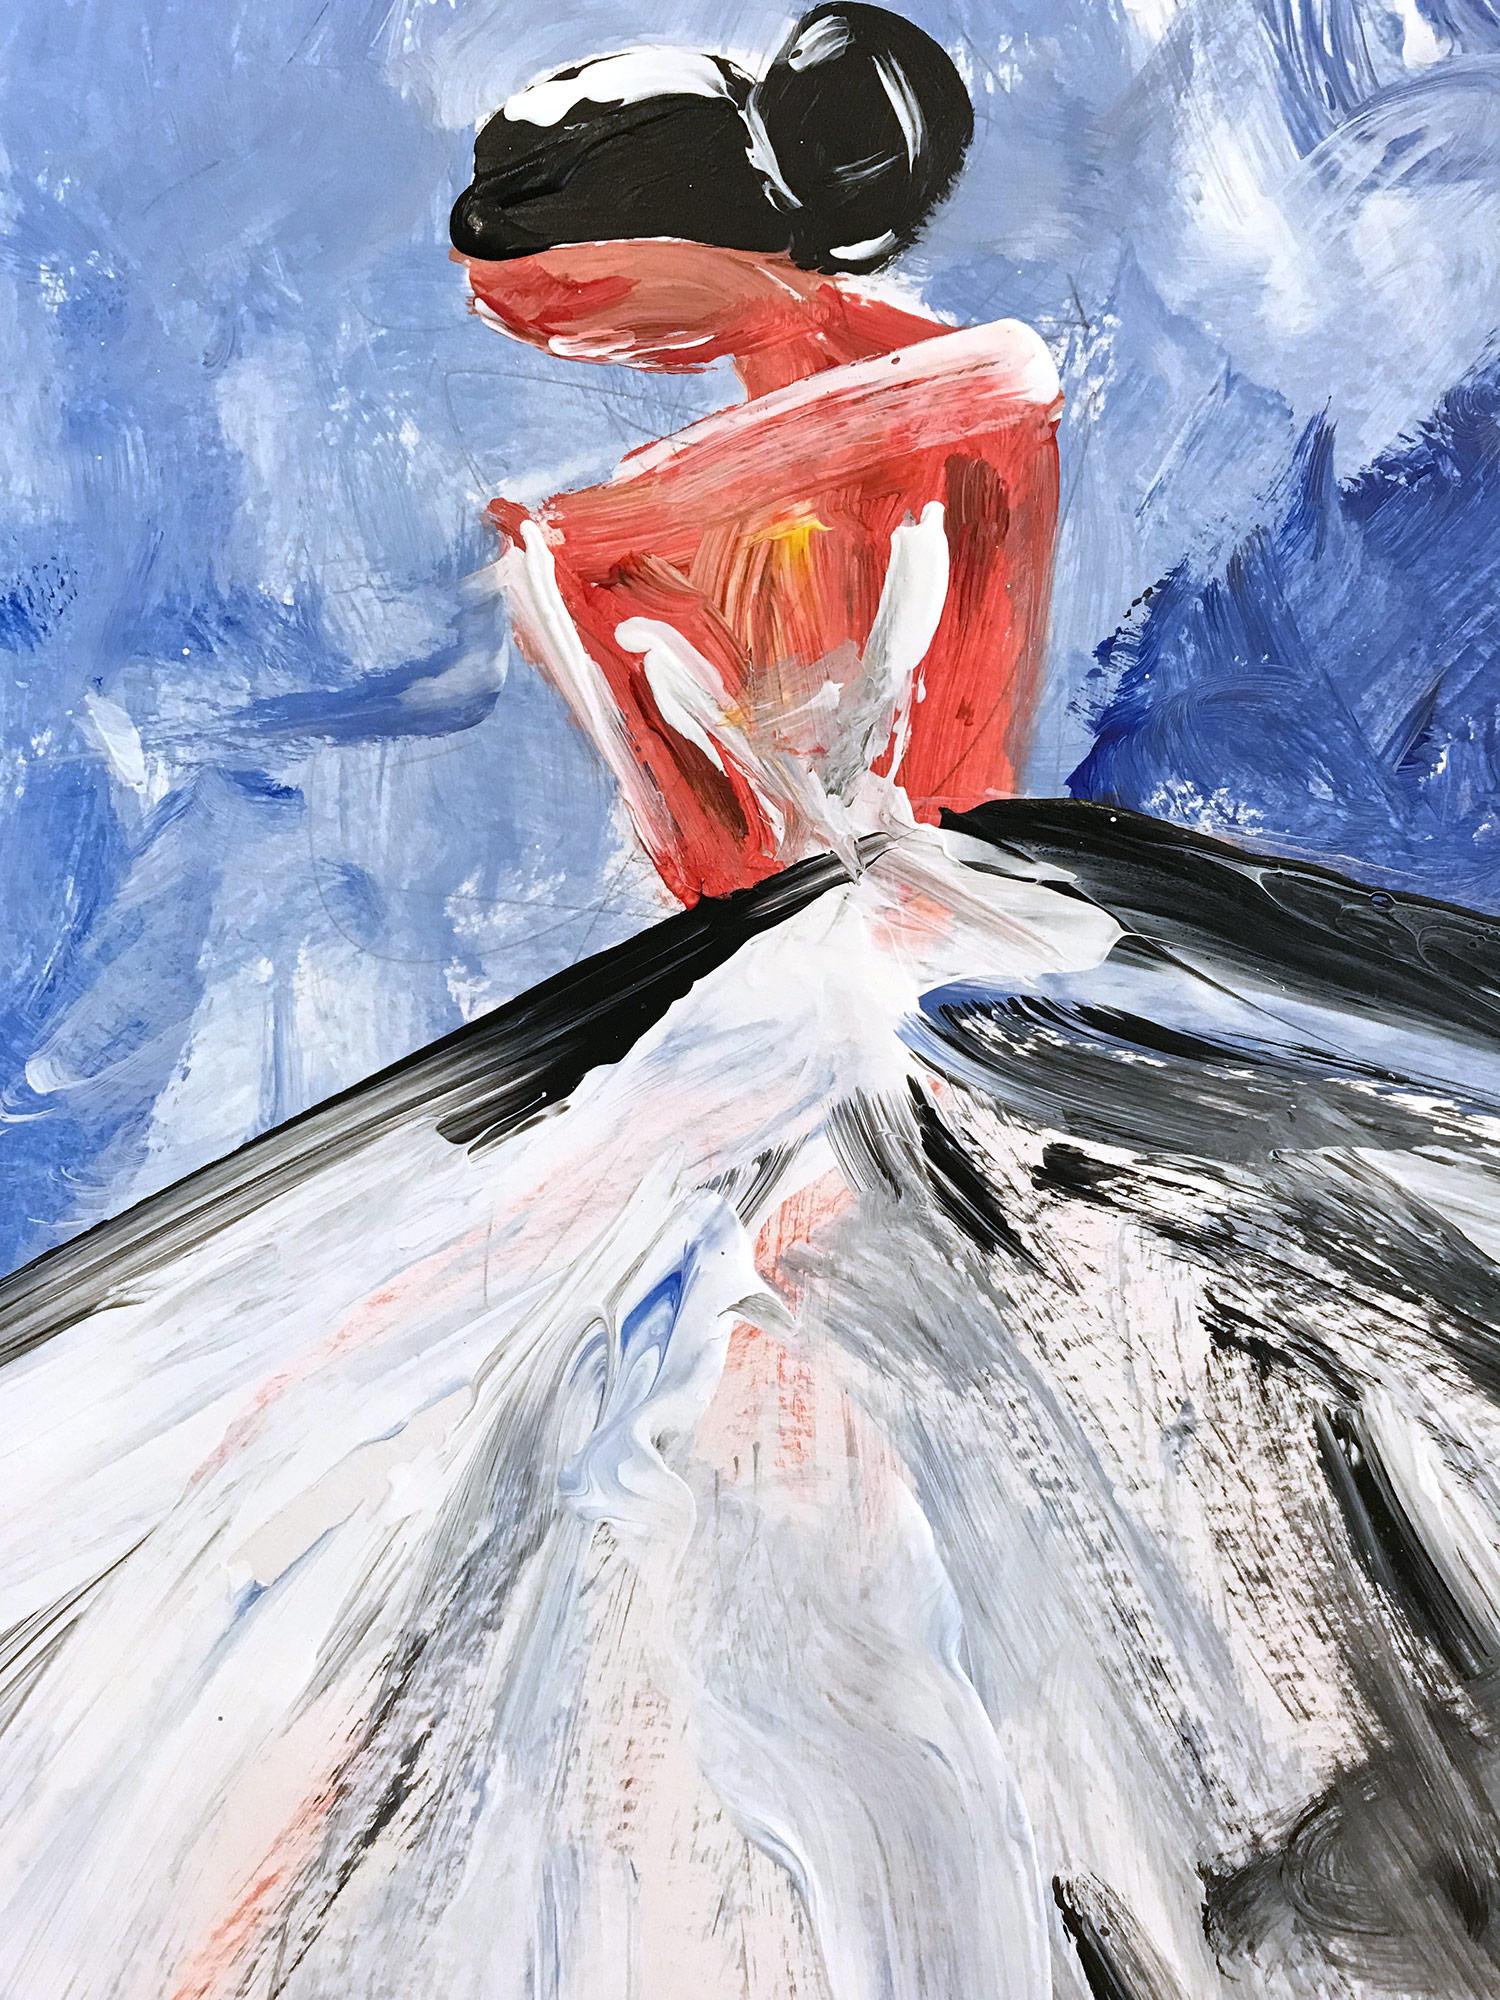 An abstract, whimsical and bold depiction of a woman standing gracefully in a white gown against a blue and white background with delicate details. This piece captures the essence of fashion in Pairs. Done in a very modern and impressionistic style,